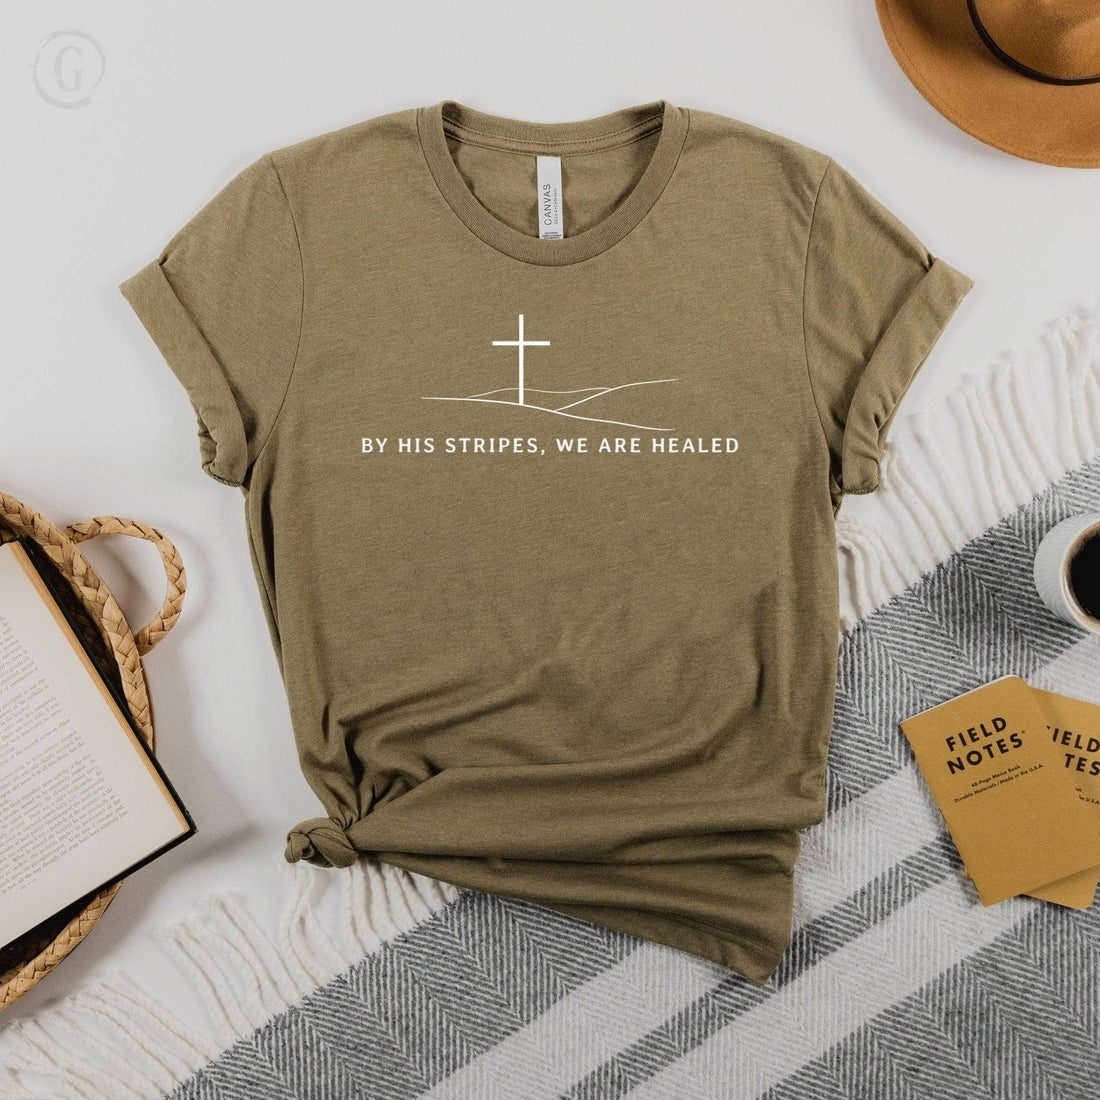 By His Stripes, We Are Healed Isaiah 53:5 Unisex T-Shirt Heathers Heather Olive